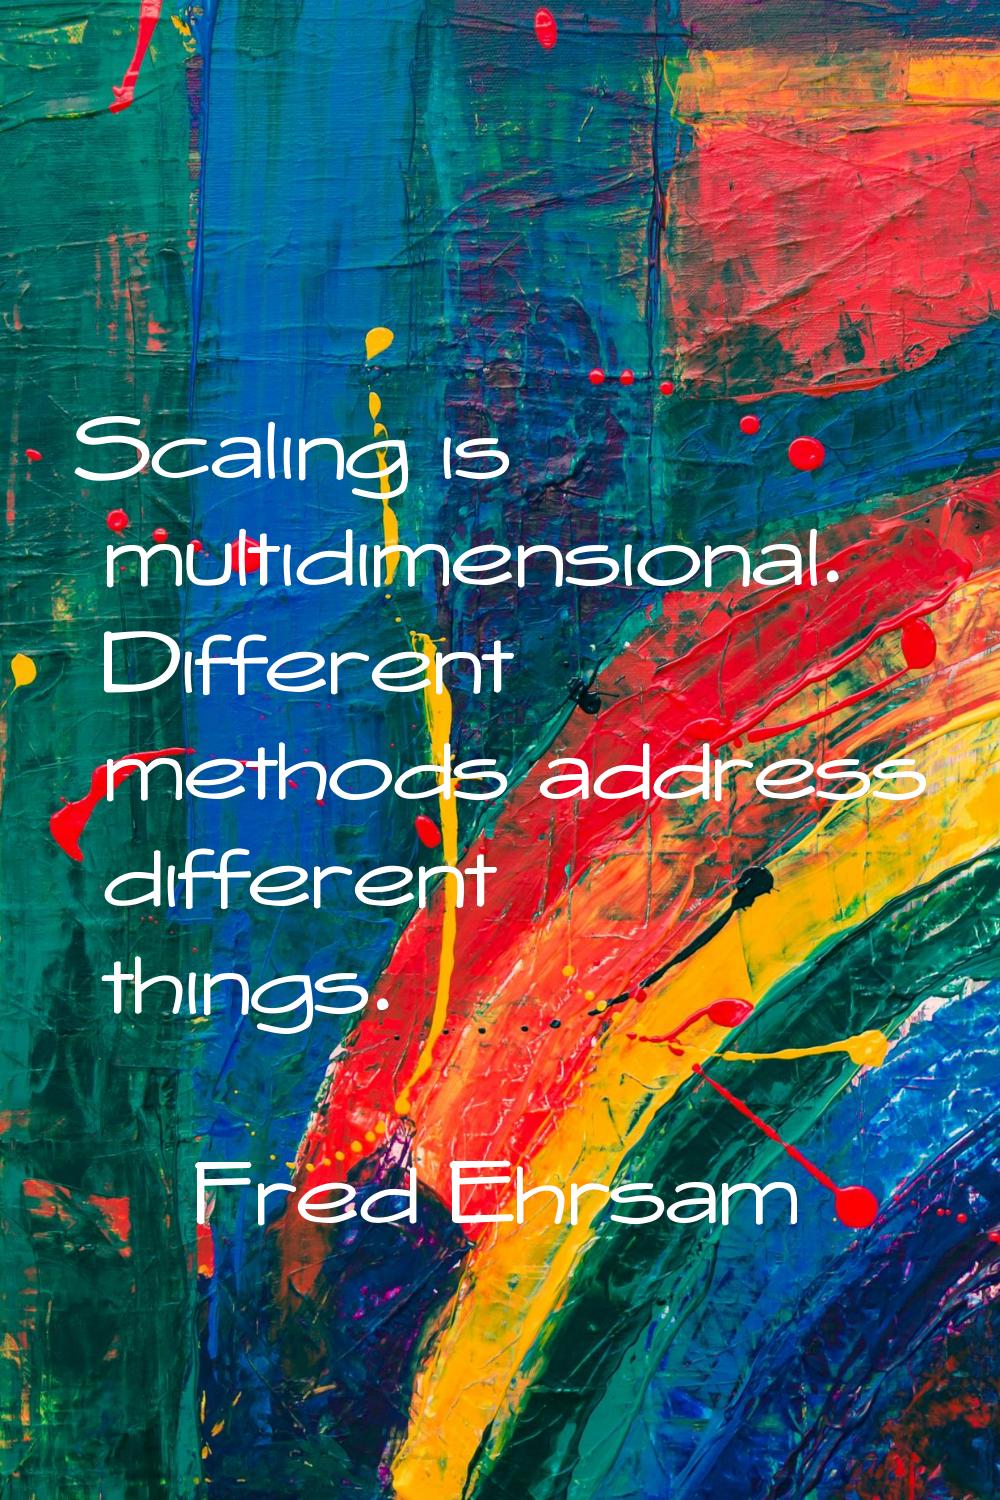 Scaling is multidimensional. Different methods address different things.